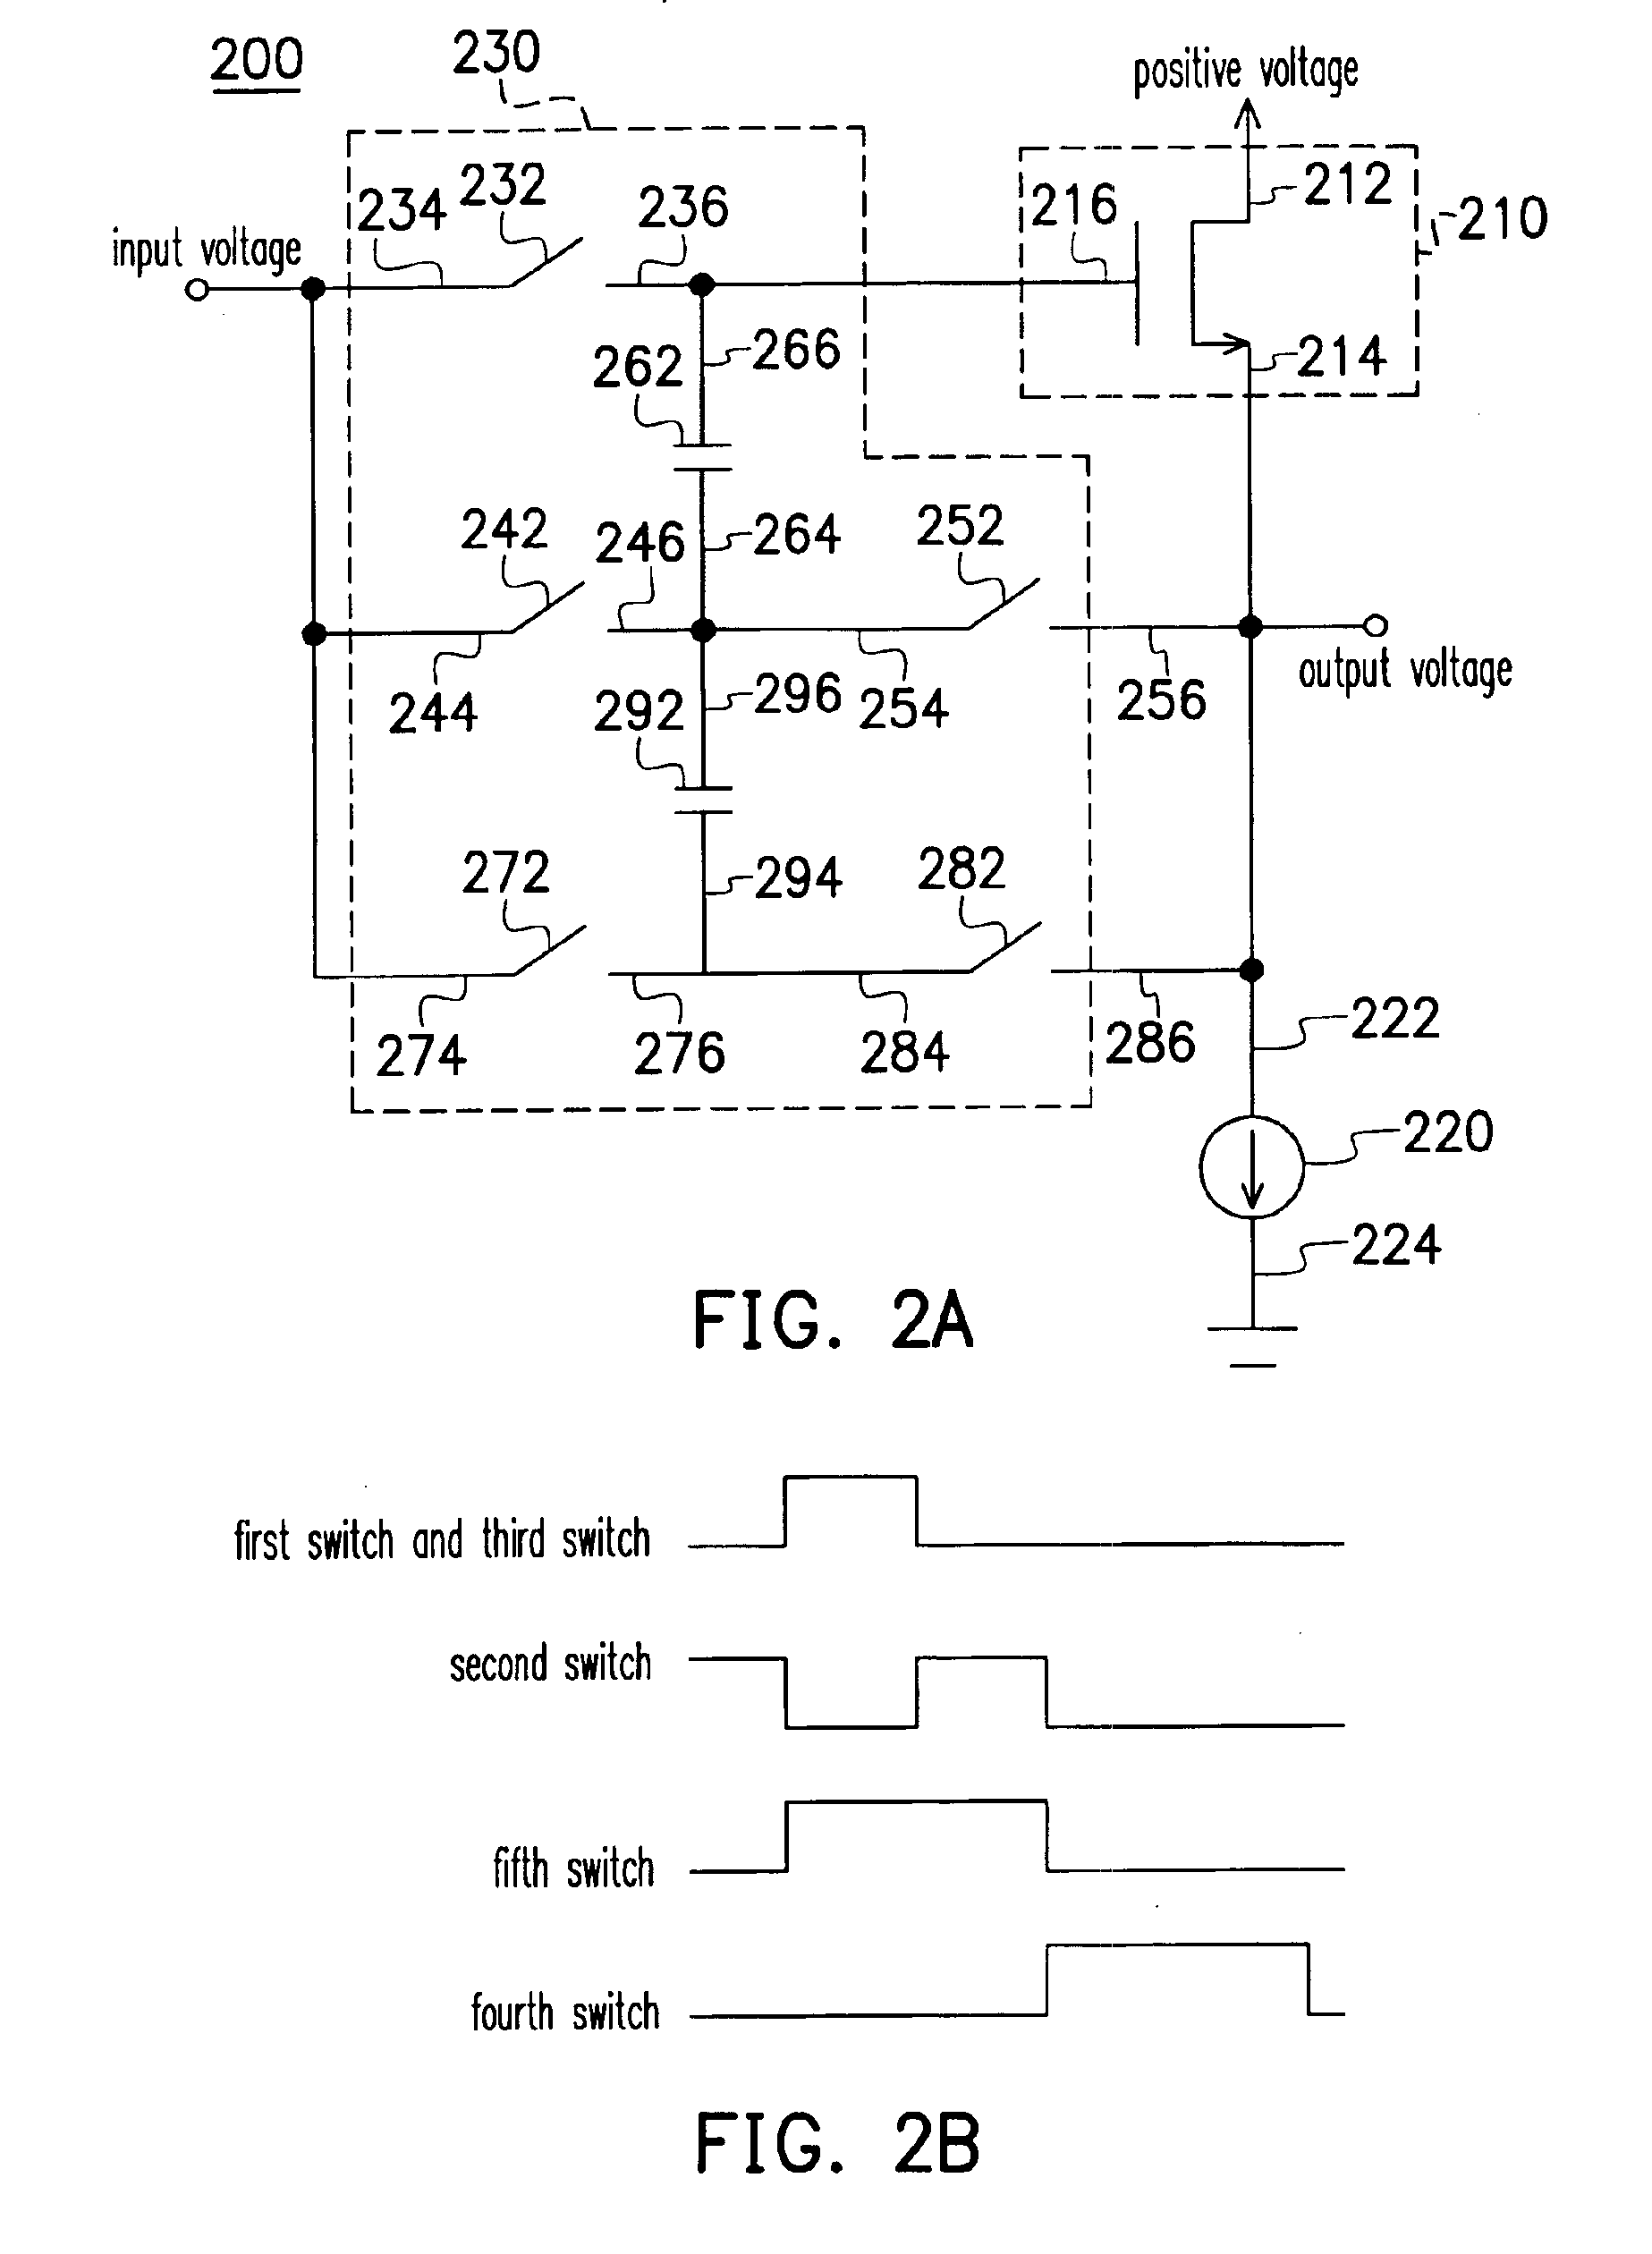 Source follower capable of compensating the threshold voltage